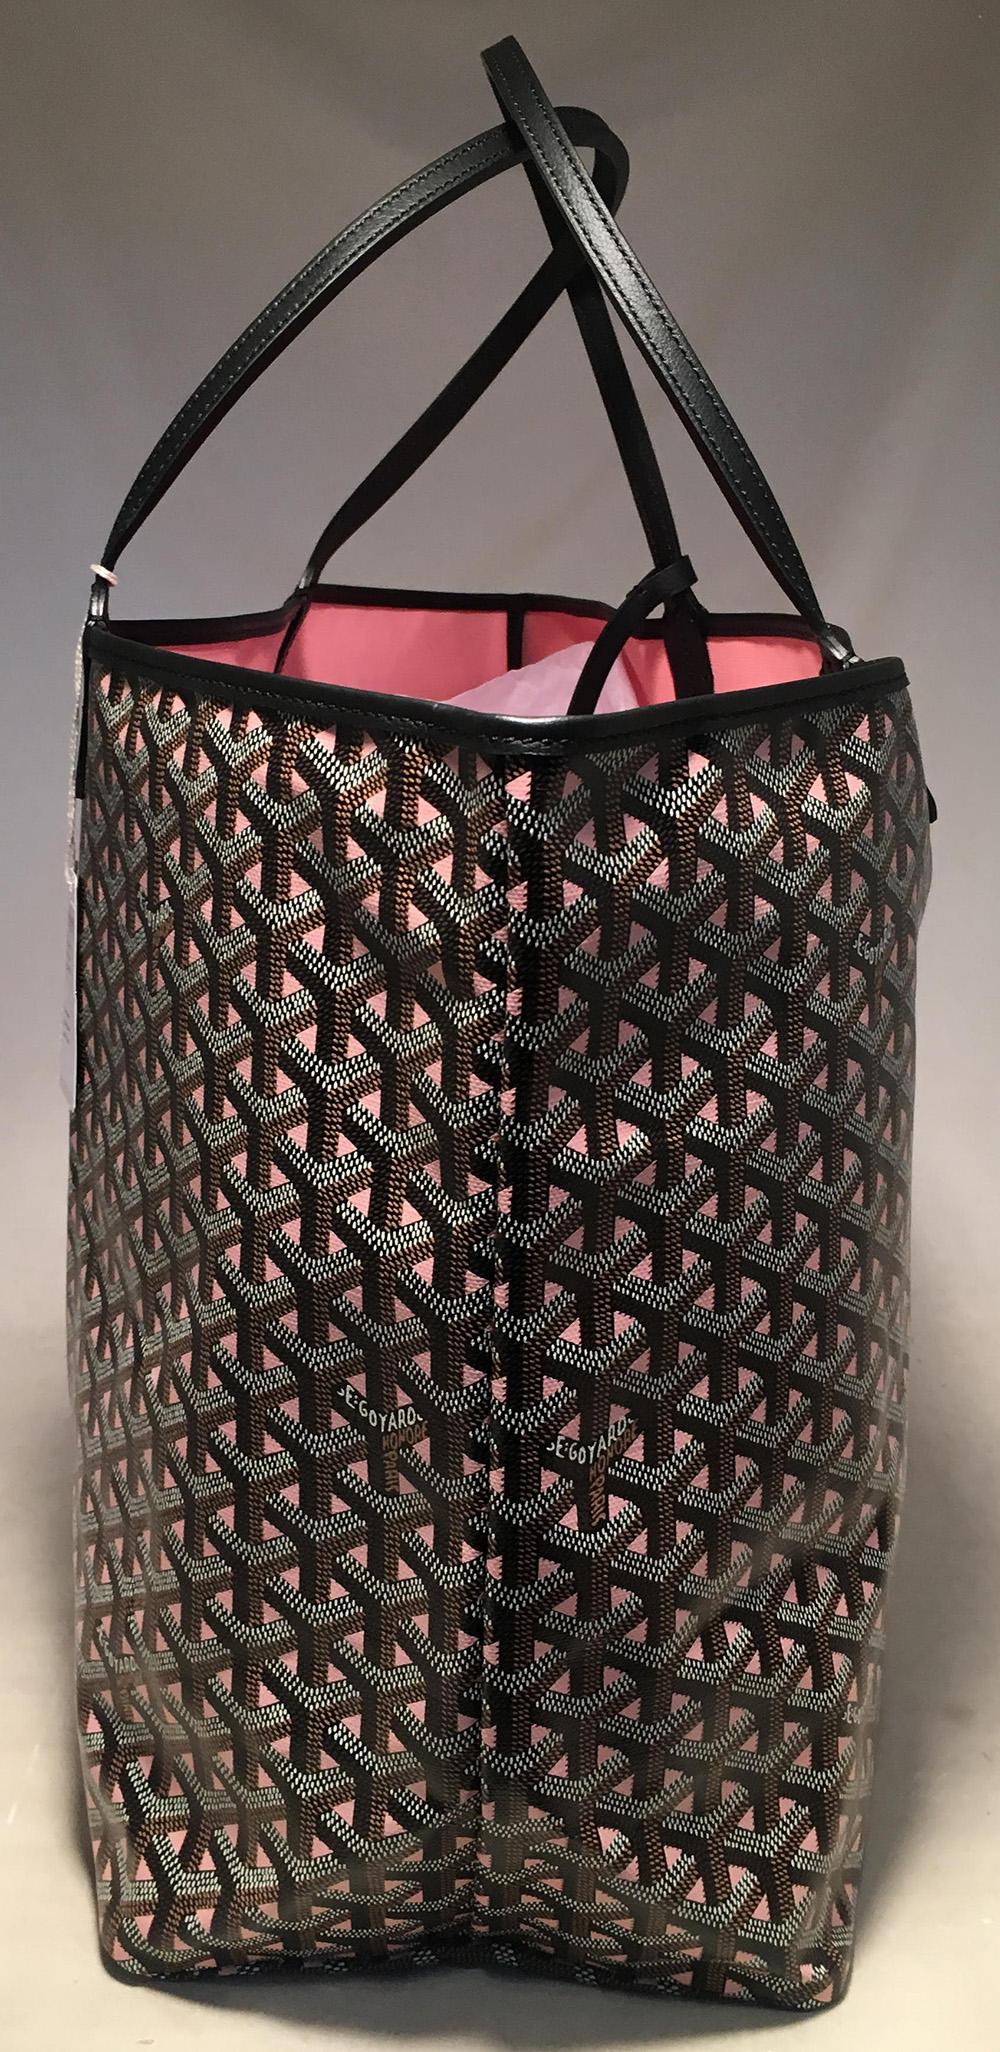 NWOT Limited Edition Goyard Claire Voie Rose Pink Special Color GM St Louis Tote in new condition. Limited edition rose pink and black hand painted canvas exterior with black leather trim. Pink canvas interior. Matching snap pouch attached. Silver